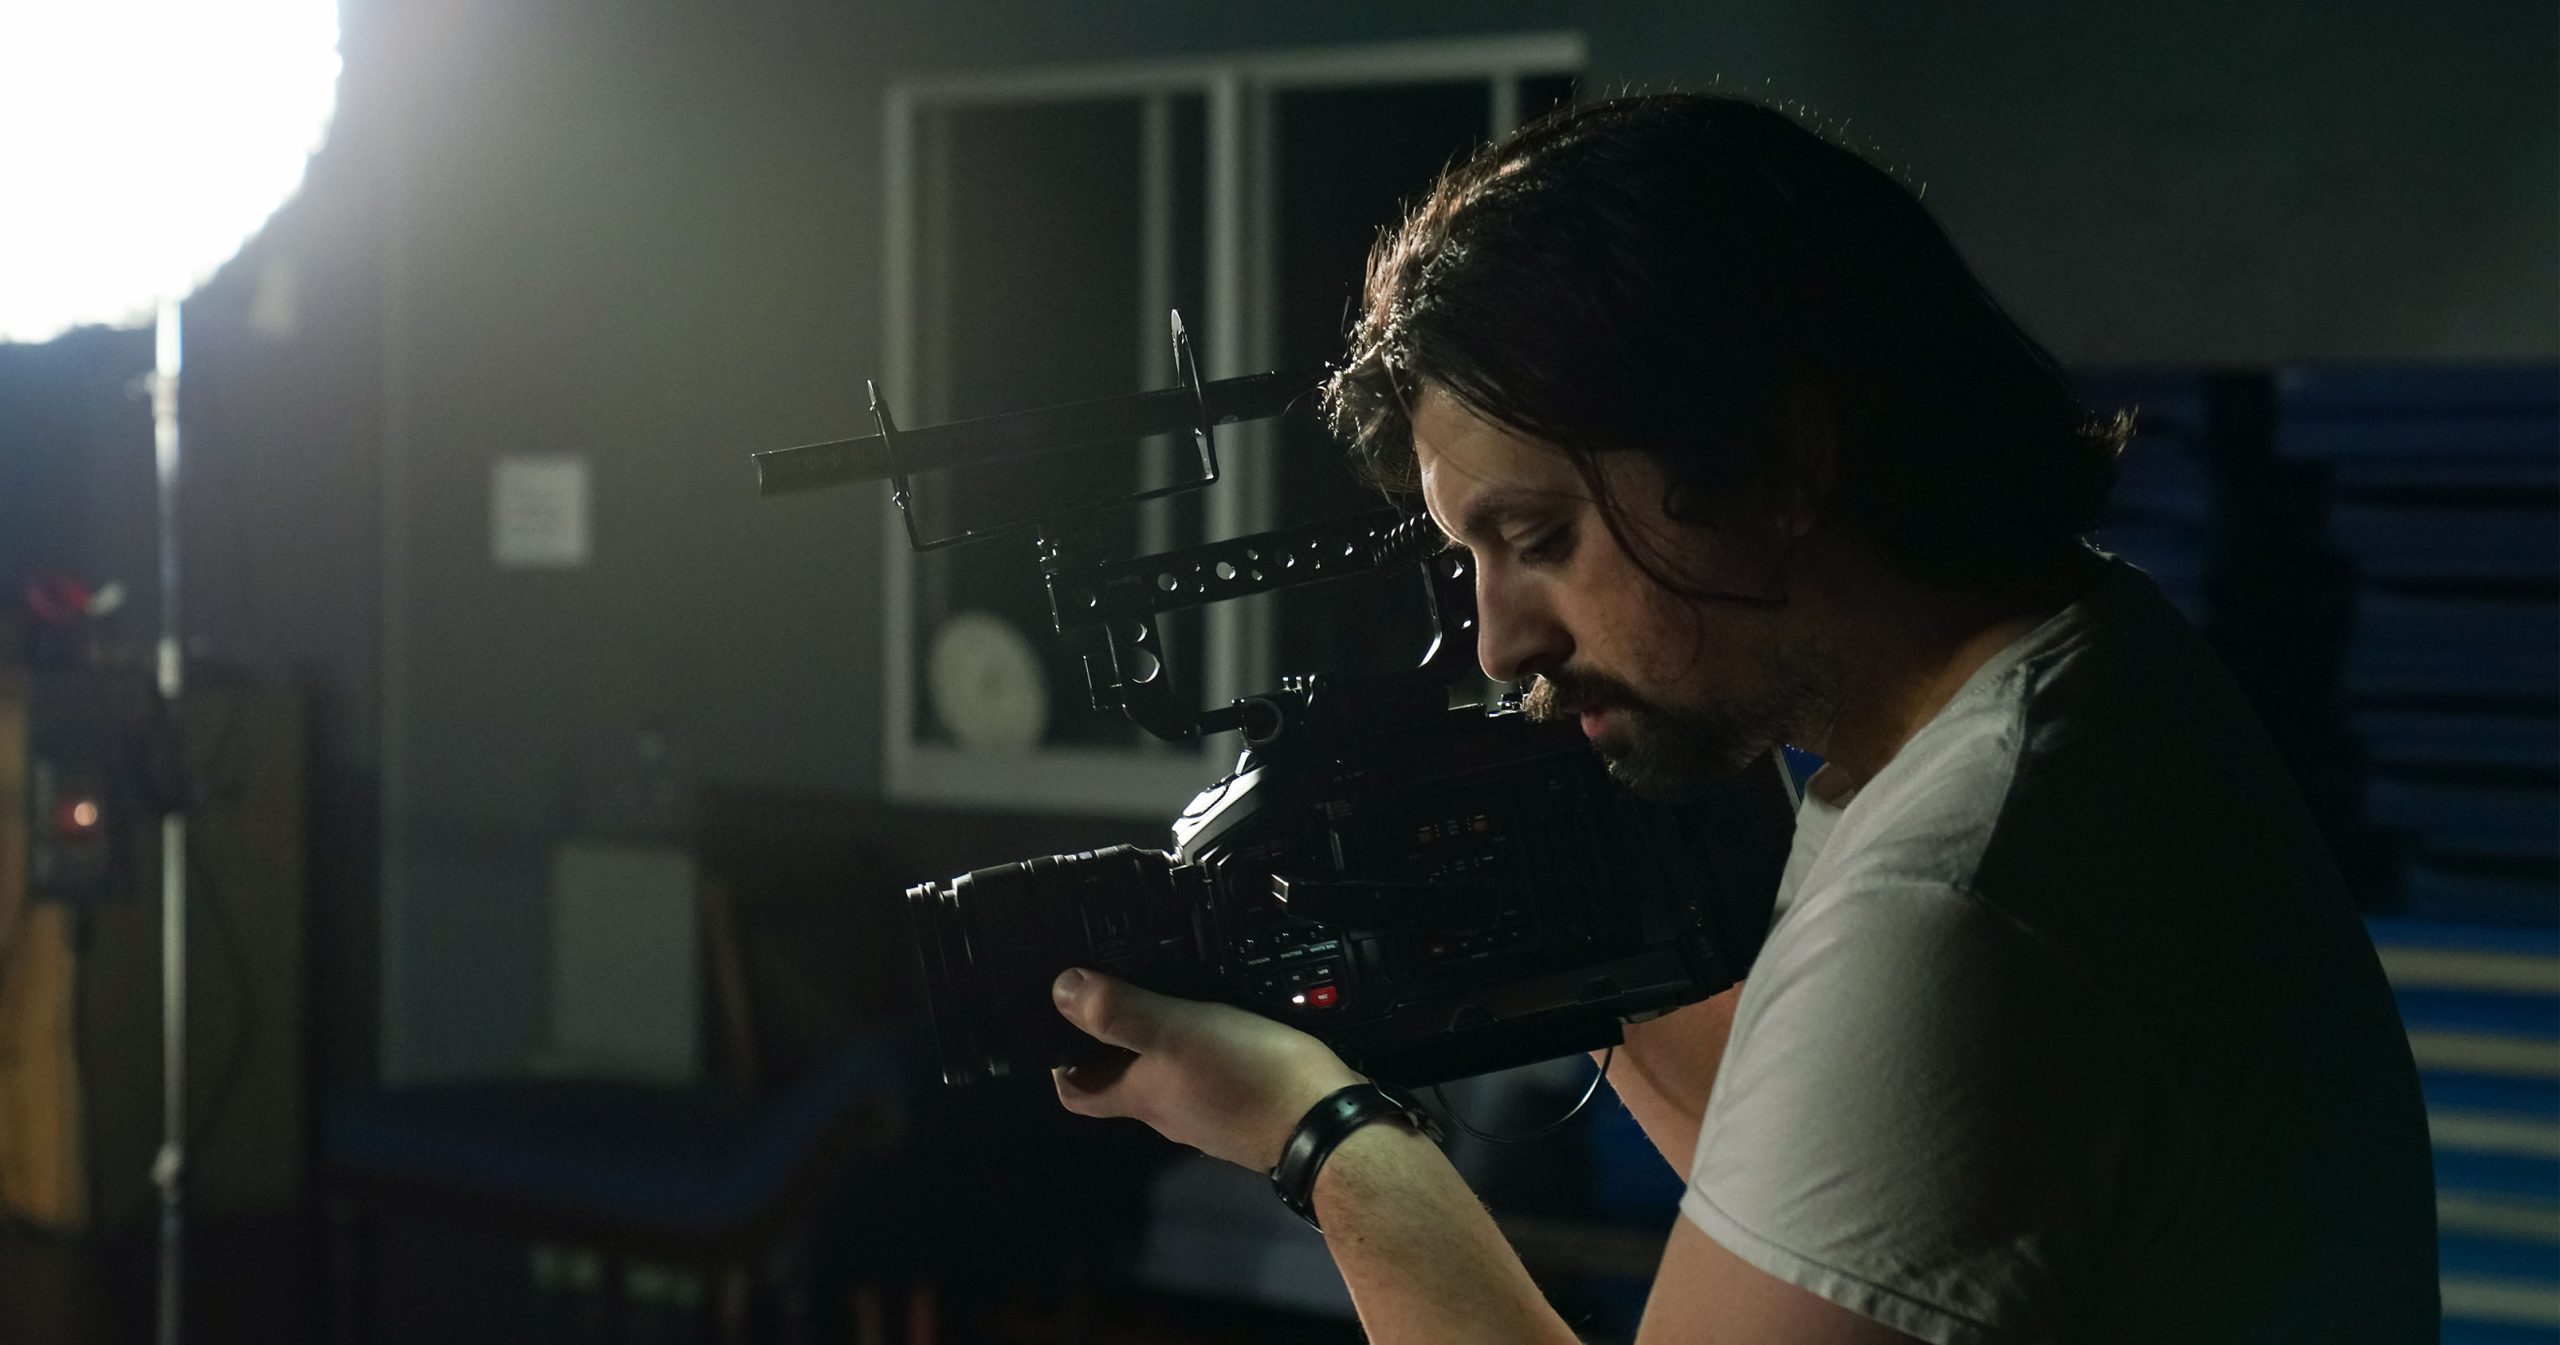 A man films with his eye held to the video camera; a spotlight shines from the upper left corner.